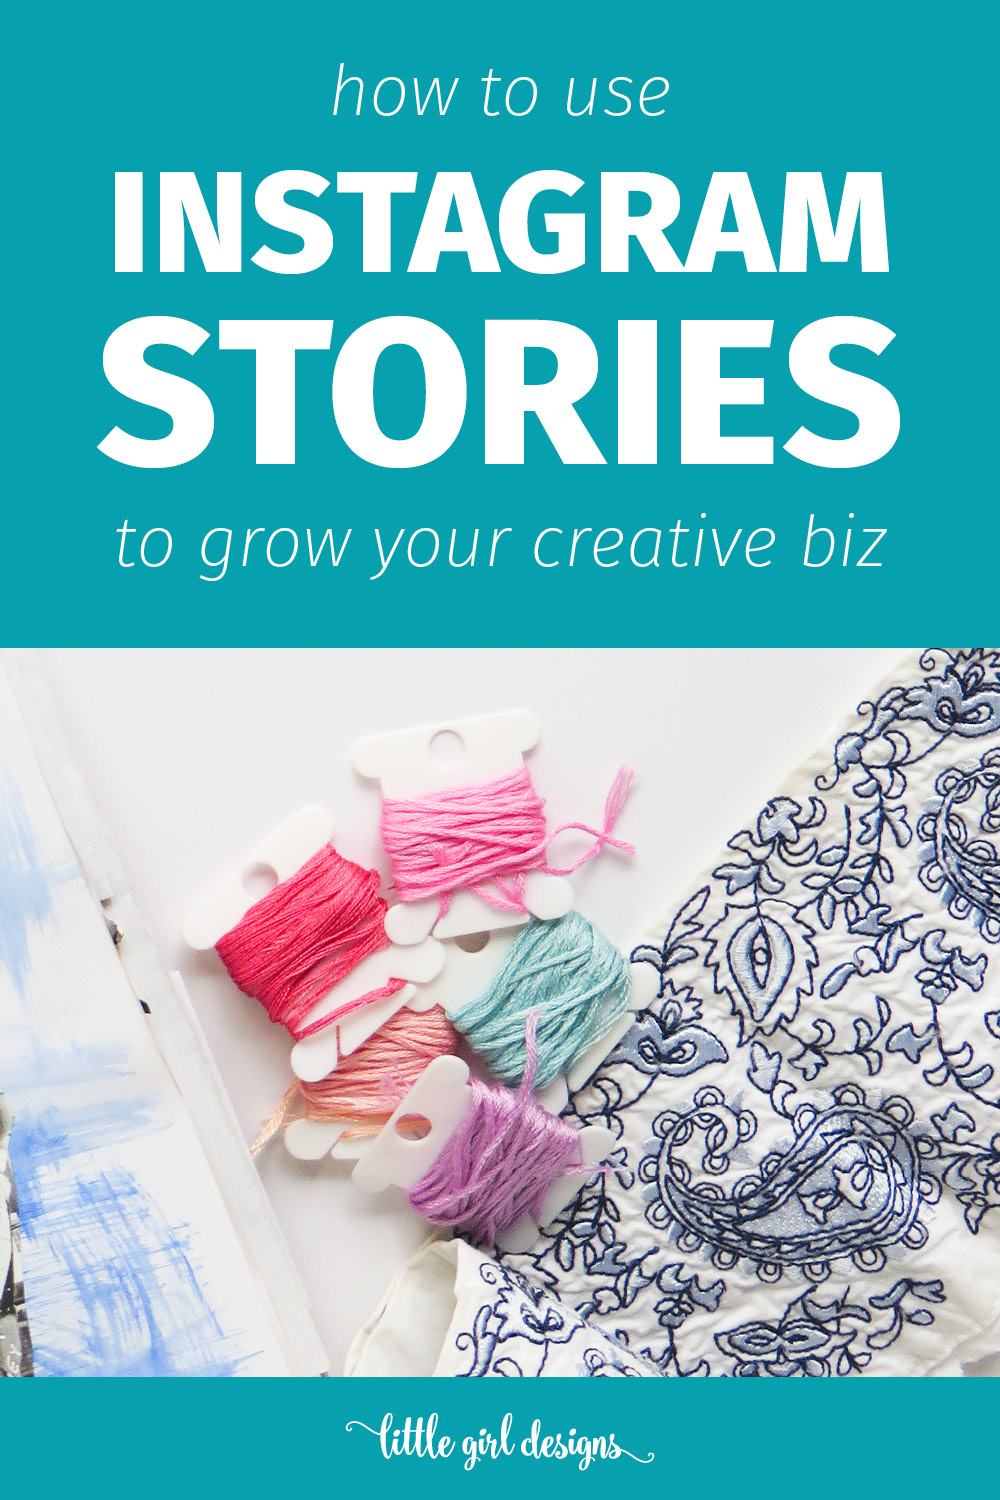 How to Use Instagram Stories to Grow your Creative Biz - Instagram stories is the newest kid on the blog for social media fun. Have you tried it? It can seriously help you grow your business as a creative. Here are some tips and hints about what it can do for you!